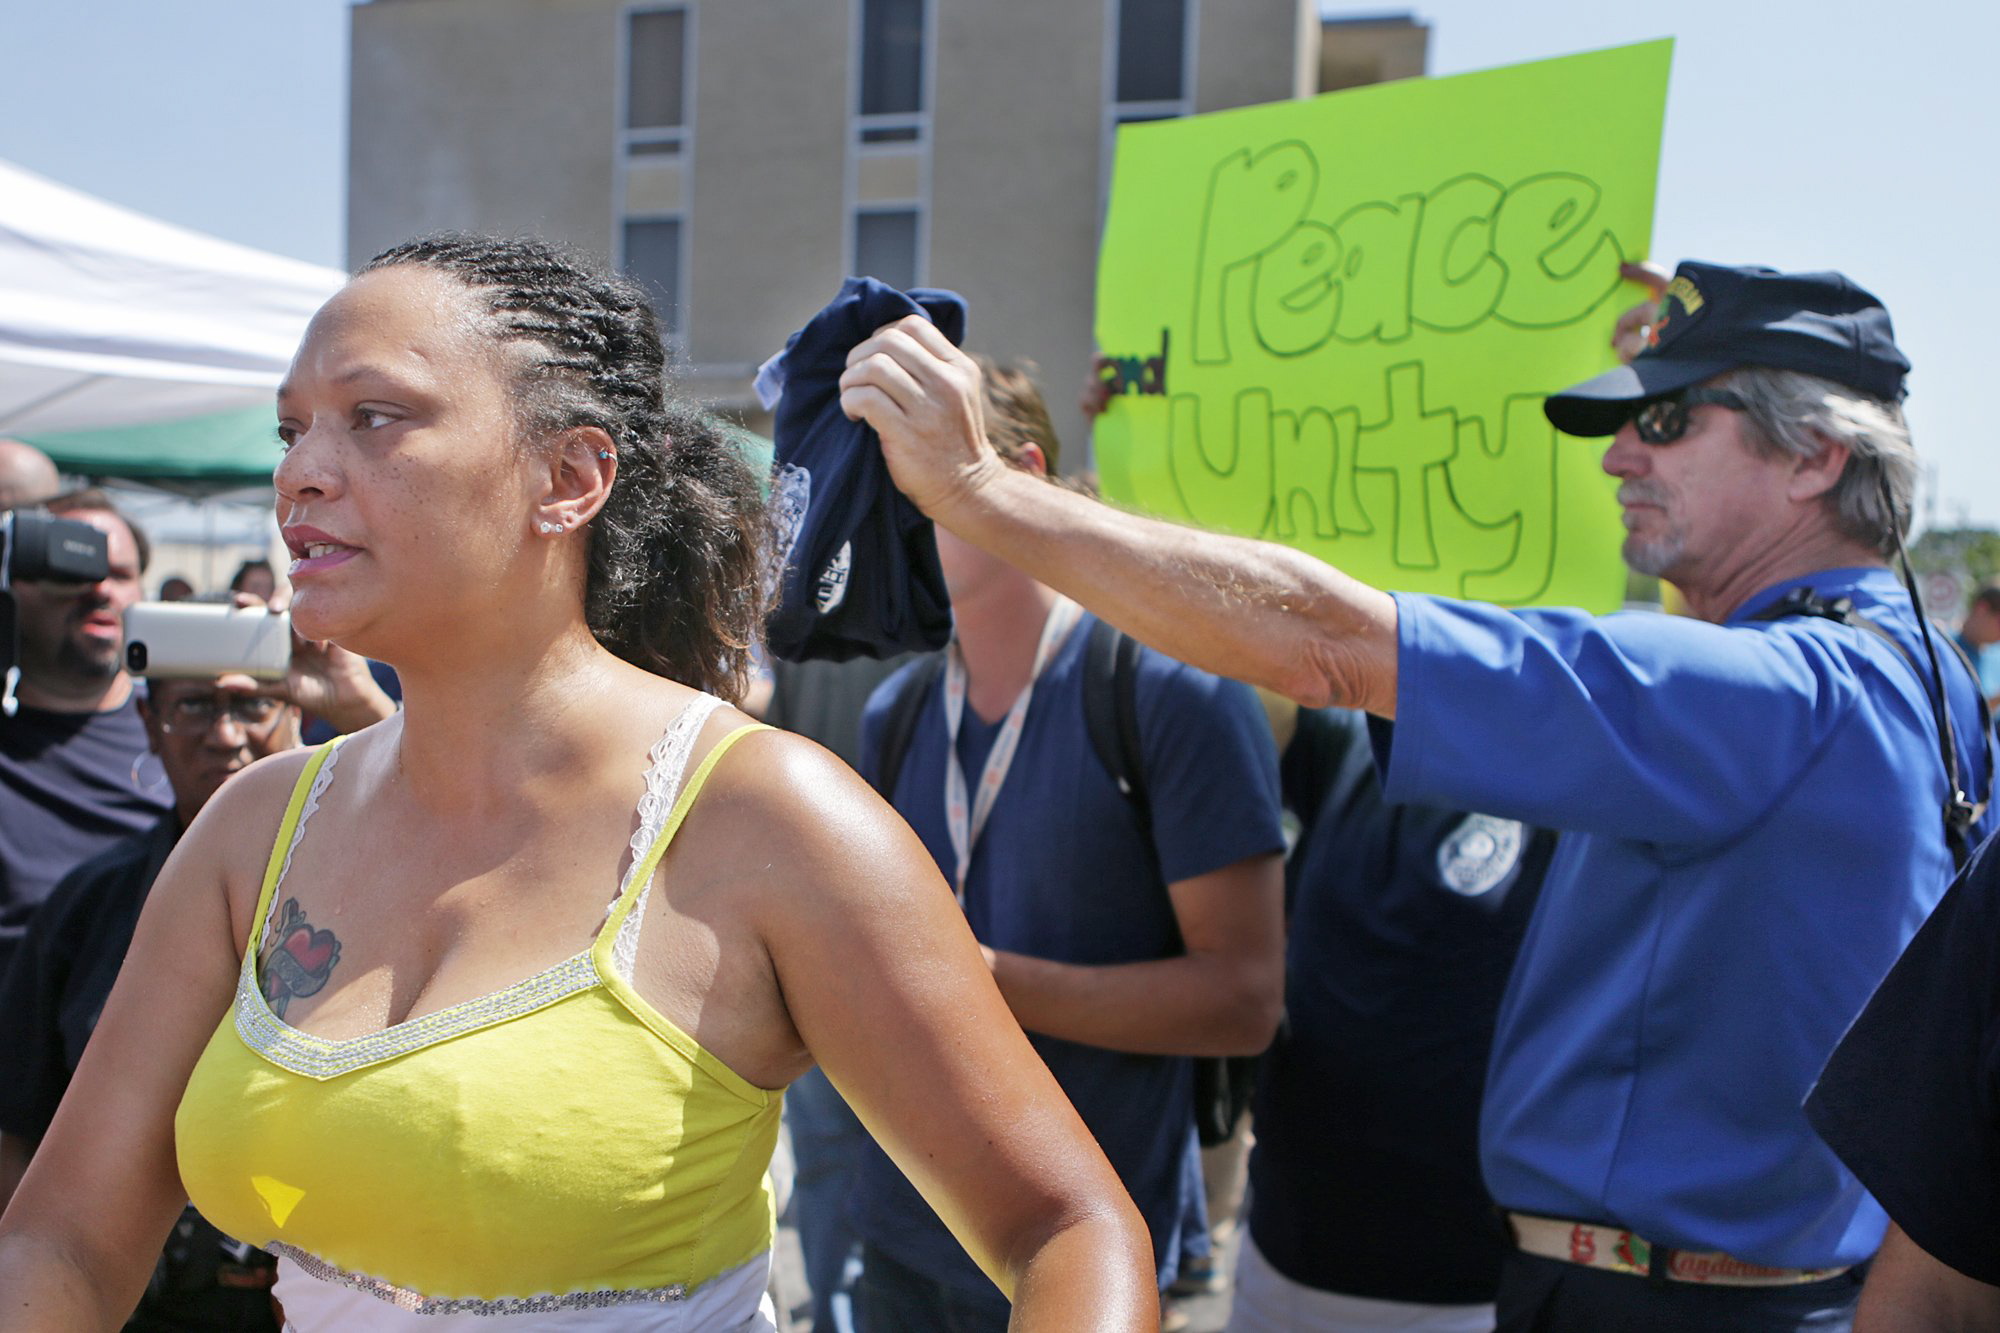 Sondra Fifer, of St. Louis, voices her disagreement with the rally for Ferguson police Officer Darren Wilson on Saturday, Aug. 23, 2014, at Barney's Sports Pub in St. Louis. &quot;I'm not against officers, I'm against police brutality,&quot; Fifer said. Ferguson's streets remained peaceful as tensions between police and protesters continued to subside after nights of violence and unrest that erupted when Wilson, a white police officer, fatally shot Michael Brown, an unarmed black 18-year-old. (AP Photo/St.